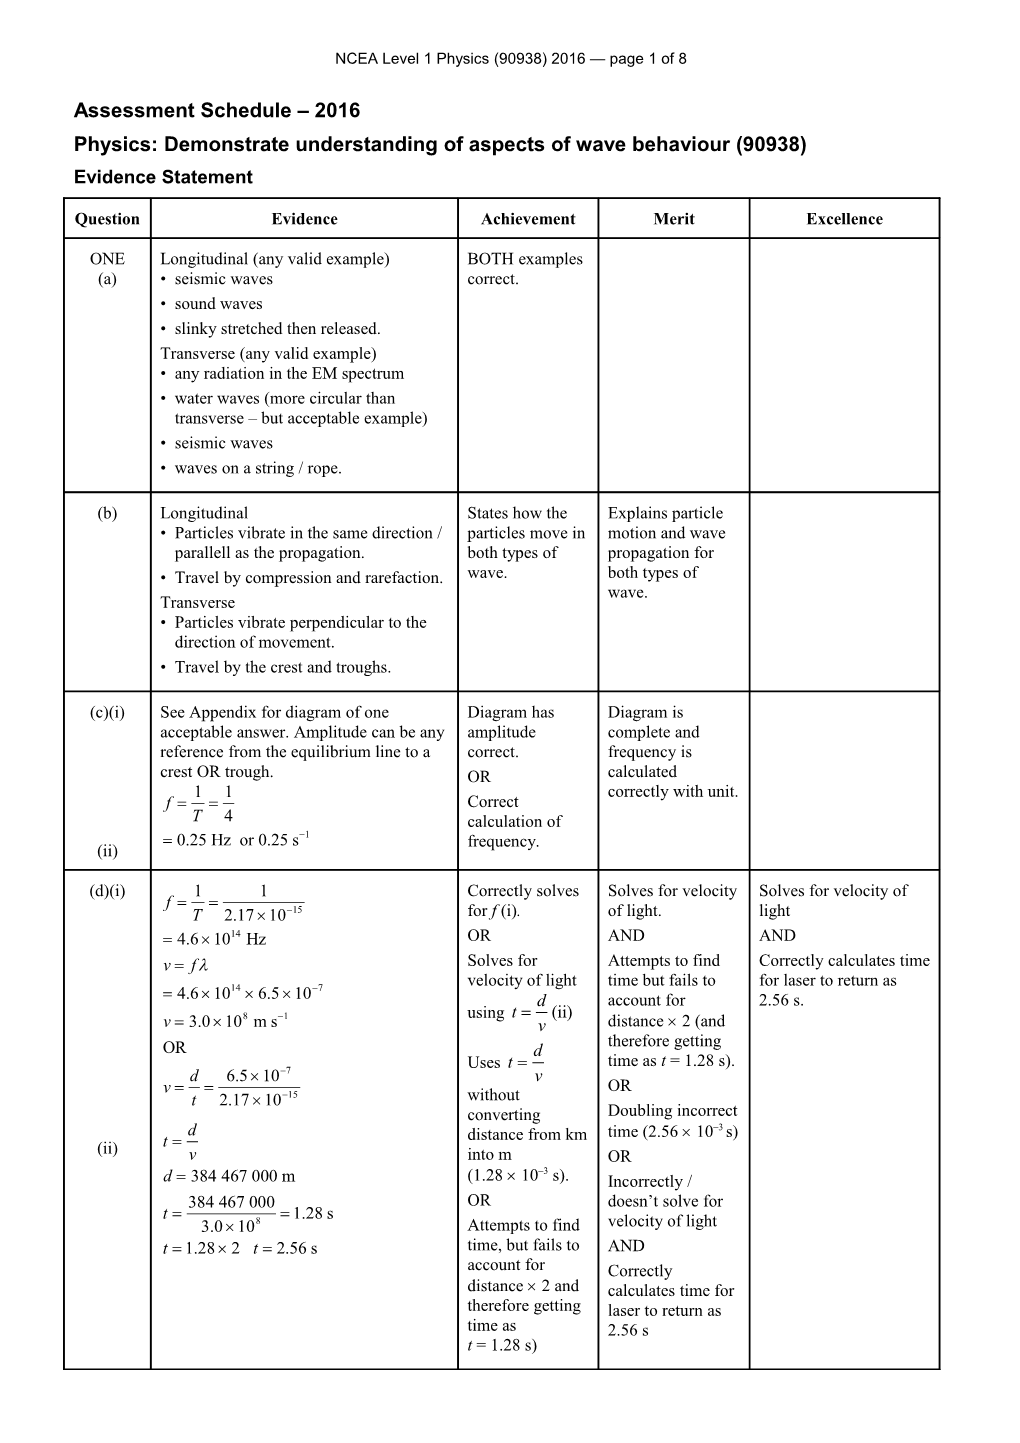 NCEA Level 1 Physics (90938) 2016 Assessment Schedule